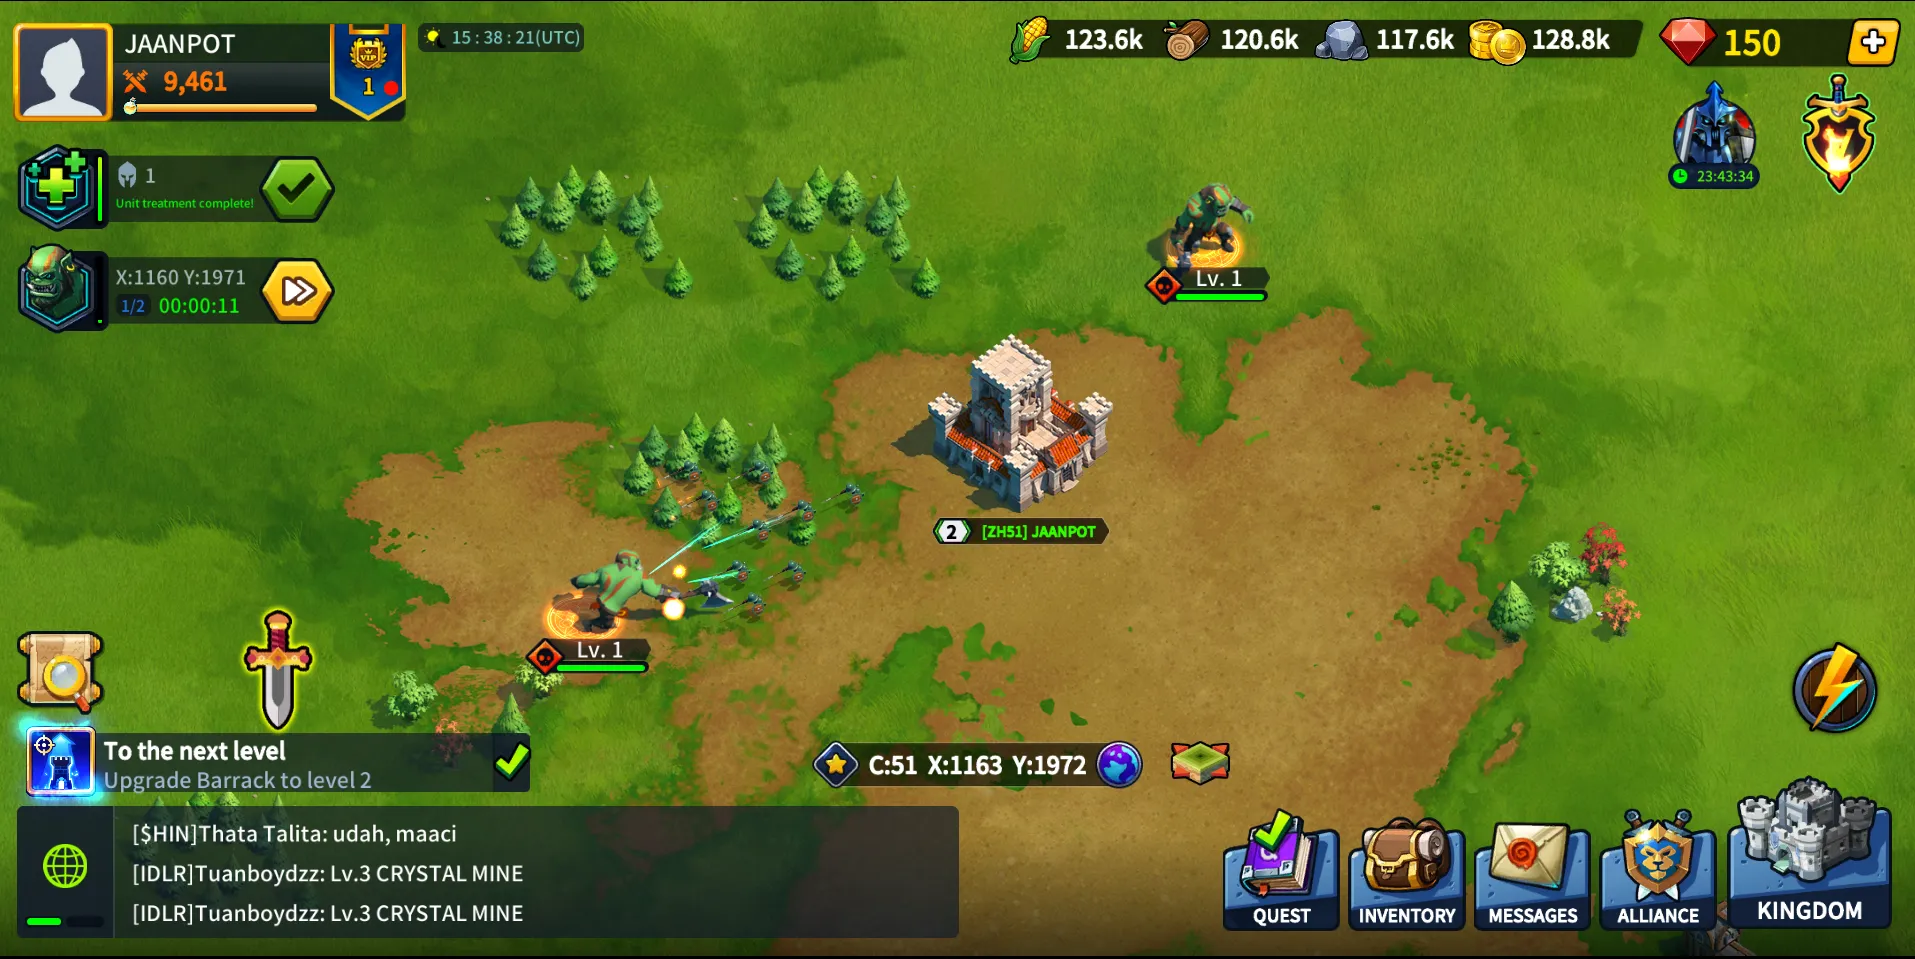 In League of Kingdoms, hunting monsters can give you some good resources in the game. Some bosses and monsters may only defeated if you have some alliances